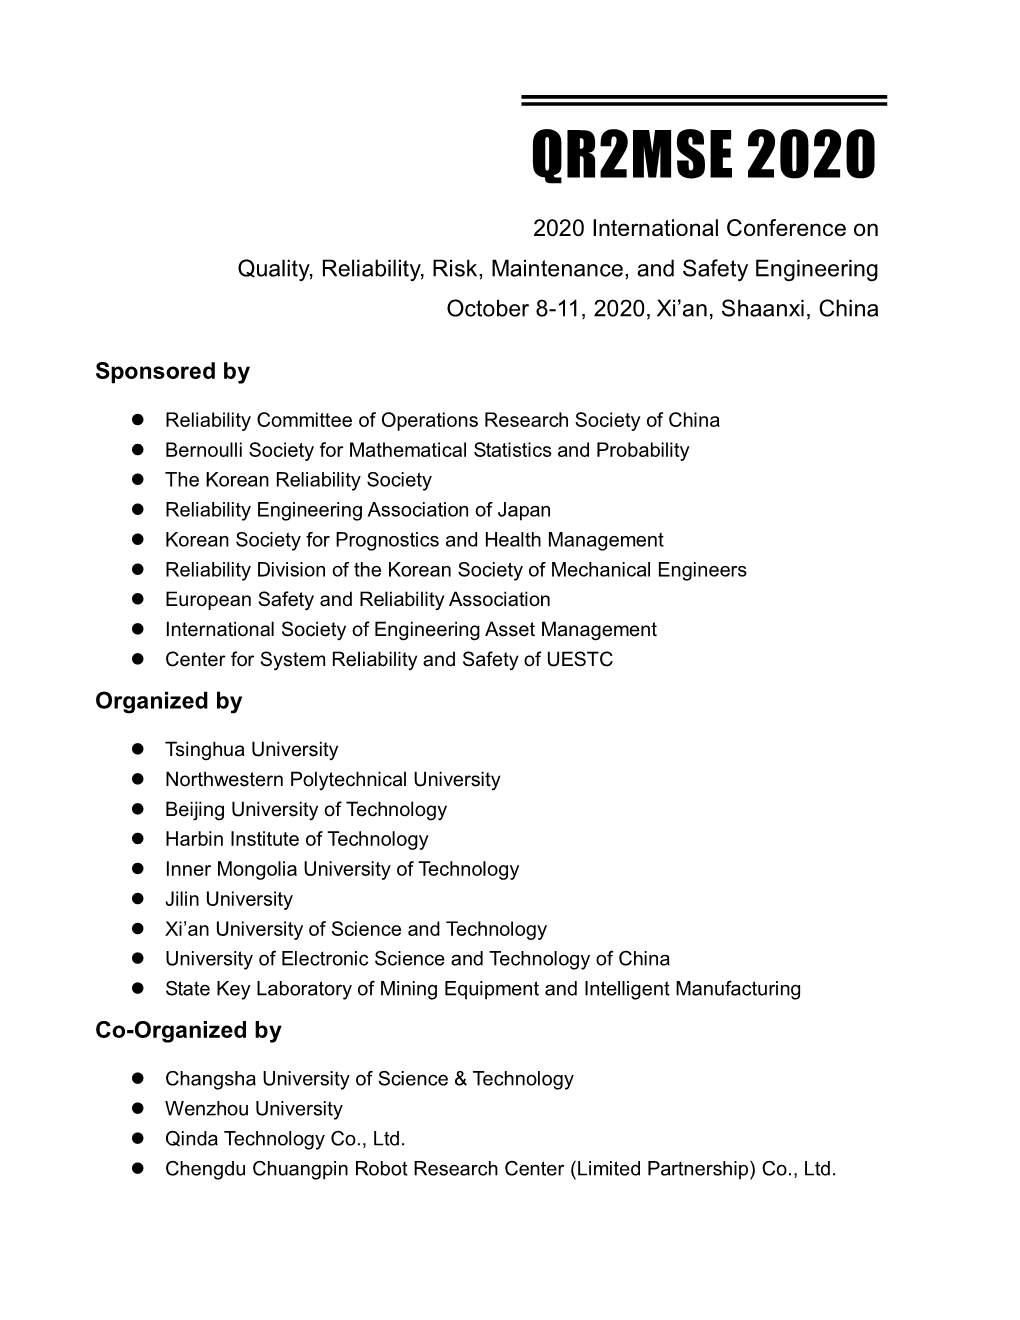 QR2MSE 2020 2020 International Conference on Quality, Reliability, Risk, Maintenance, and Safety Engineering October 8-11, 2020, Xi’An, Shaanxi, China Sponsored By